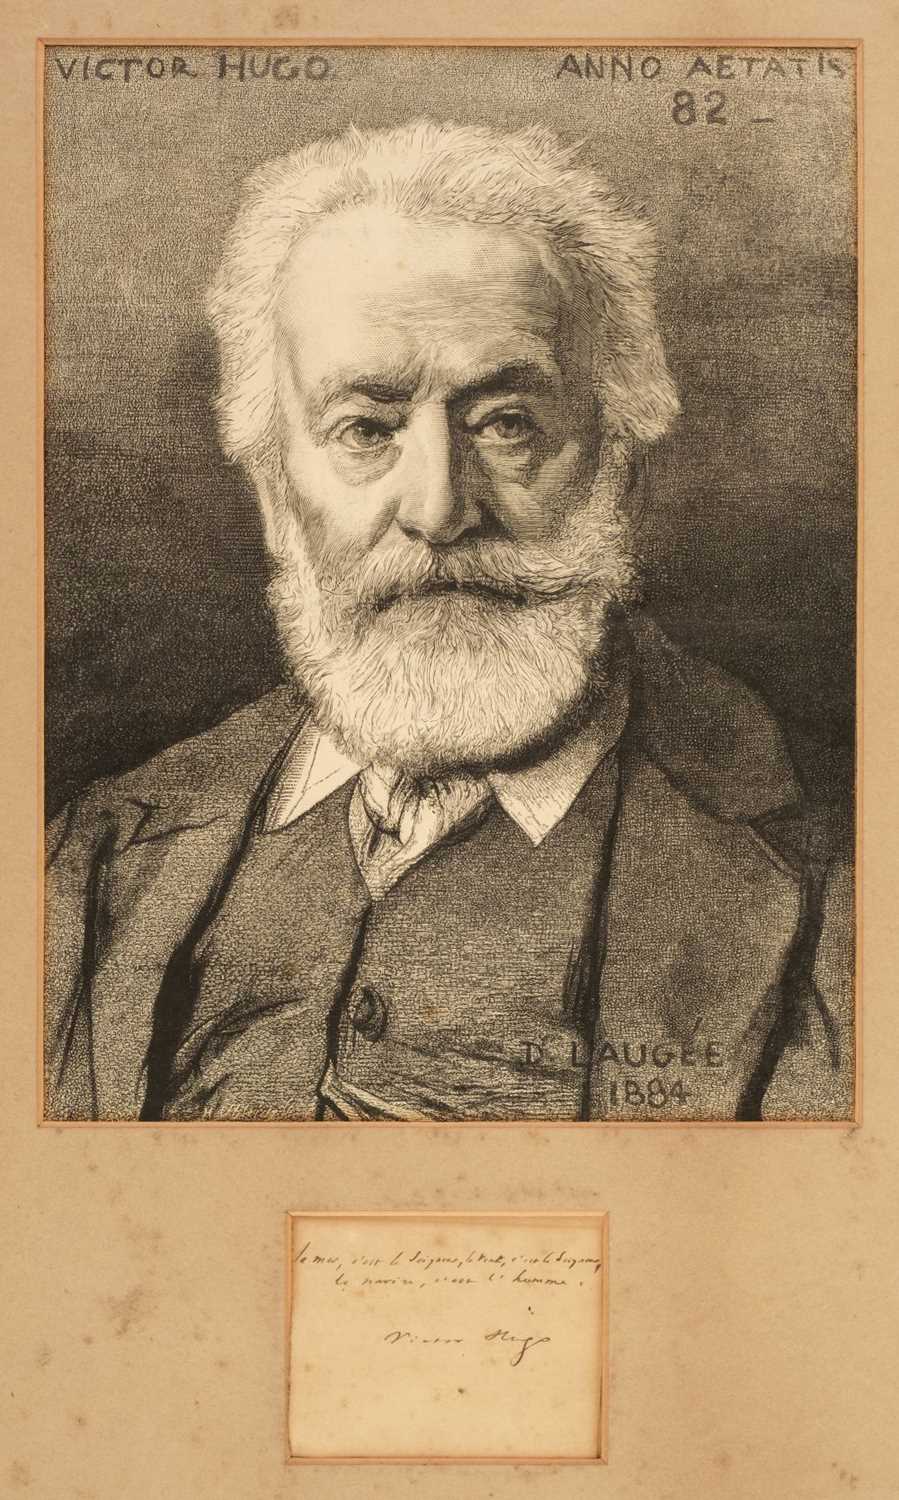 Lot 207 - Hugo (Victor, 1802-1885). Autograph quotation signed, by Victor Hugo